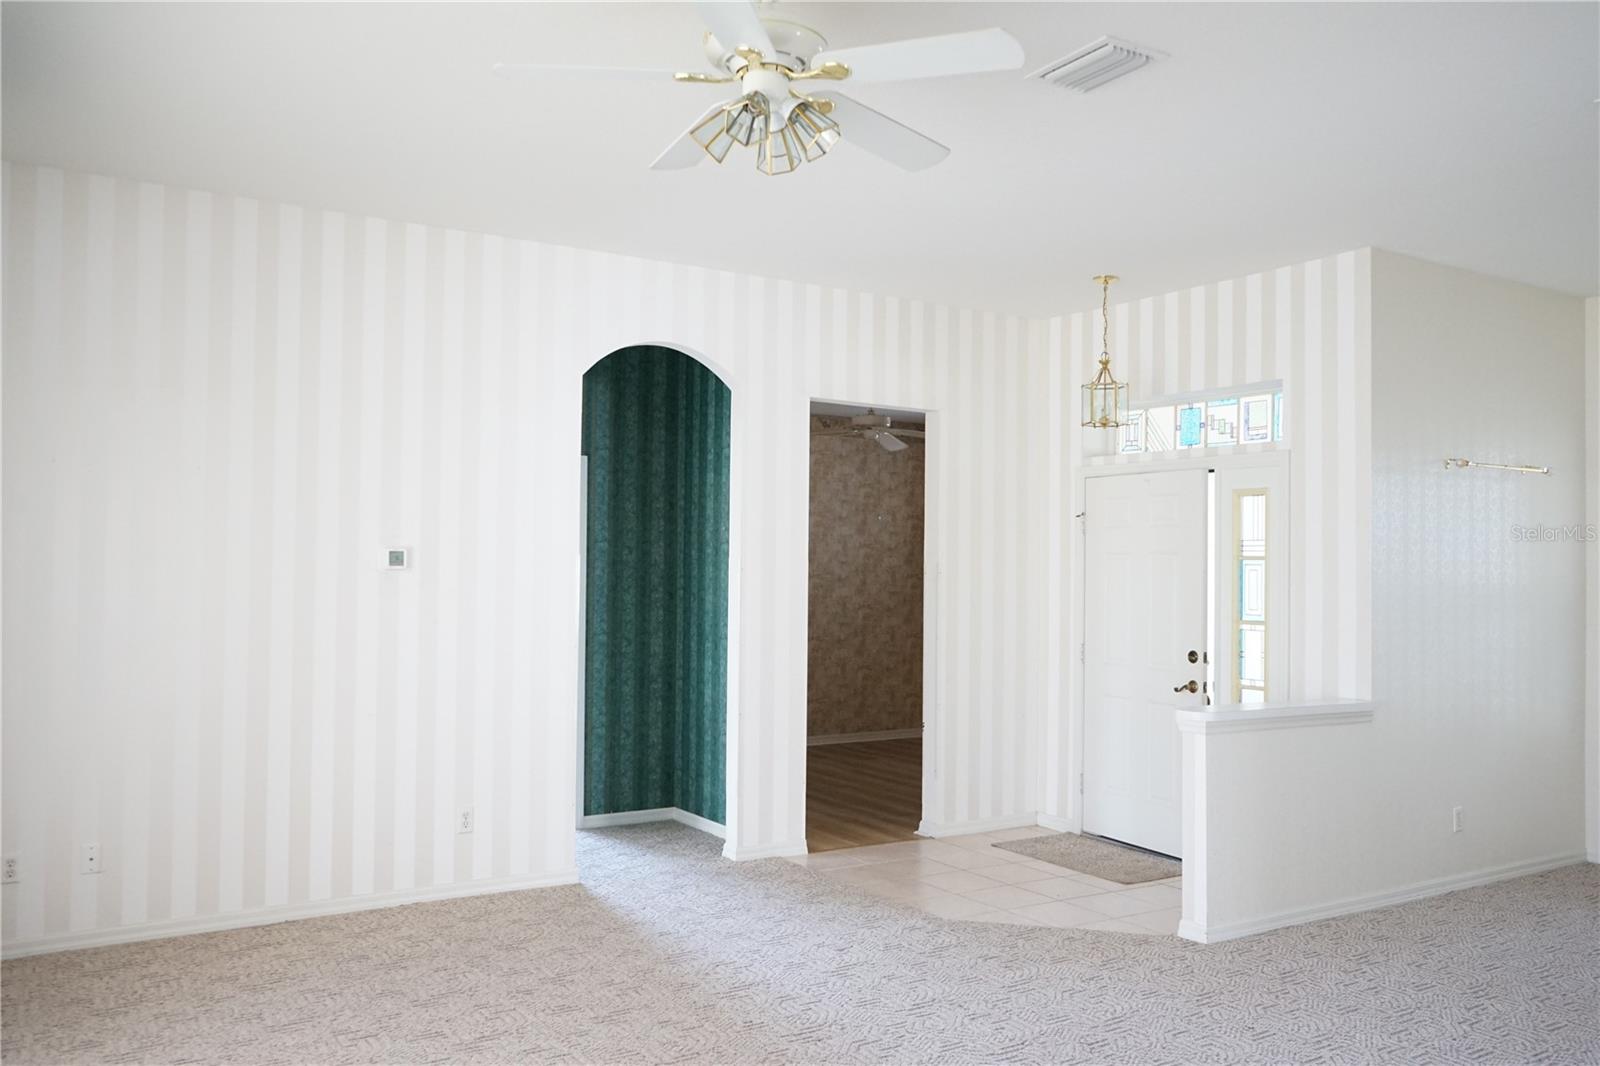 entry, den is door on right, left green hallway is to hall bath and guest bedroom